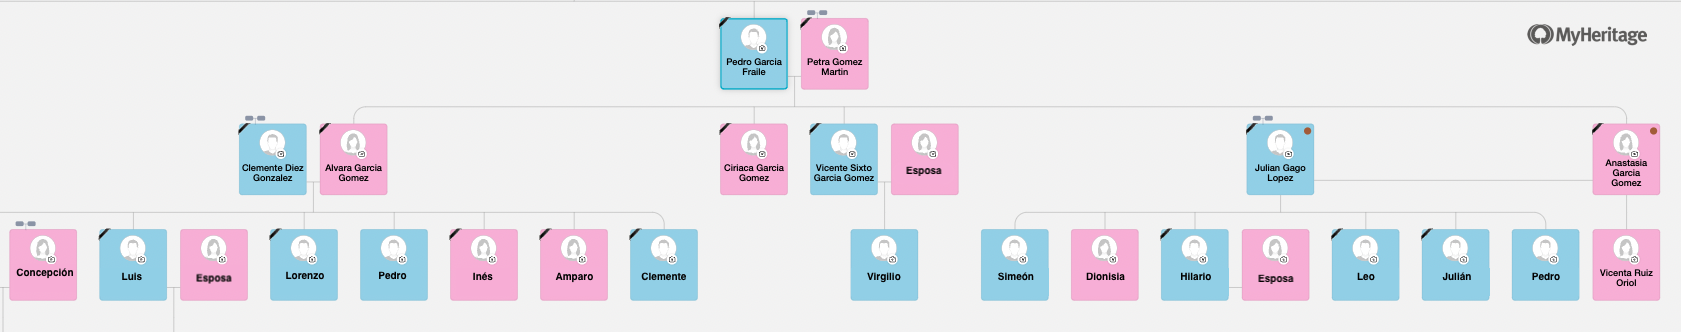 The descendants of Pedro García Fraile and Petra Gómez Martín on the MyHeritage family tree we constructed